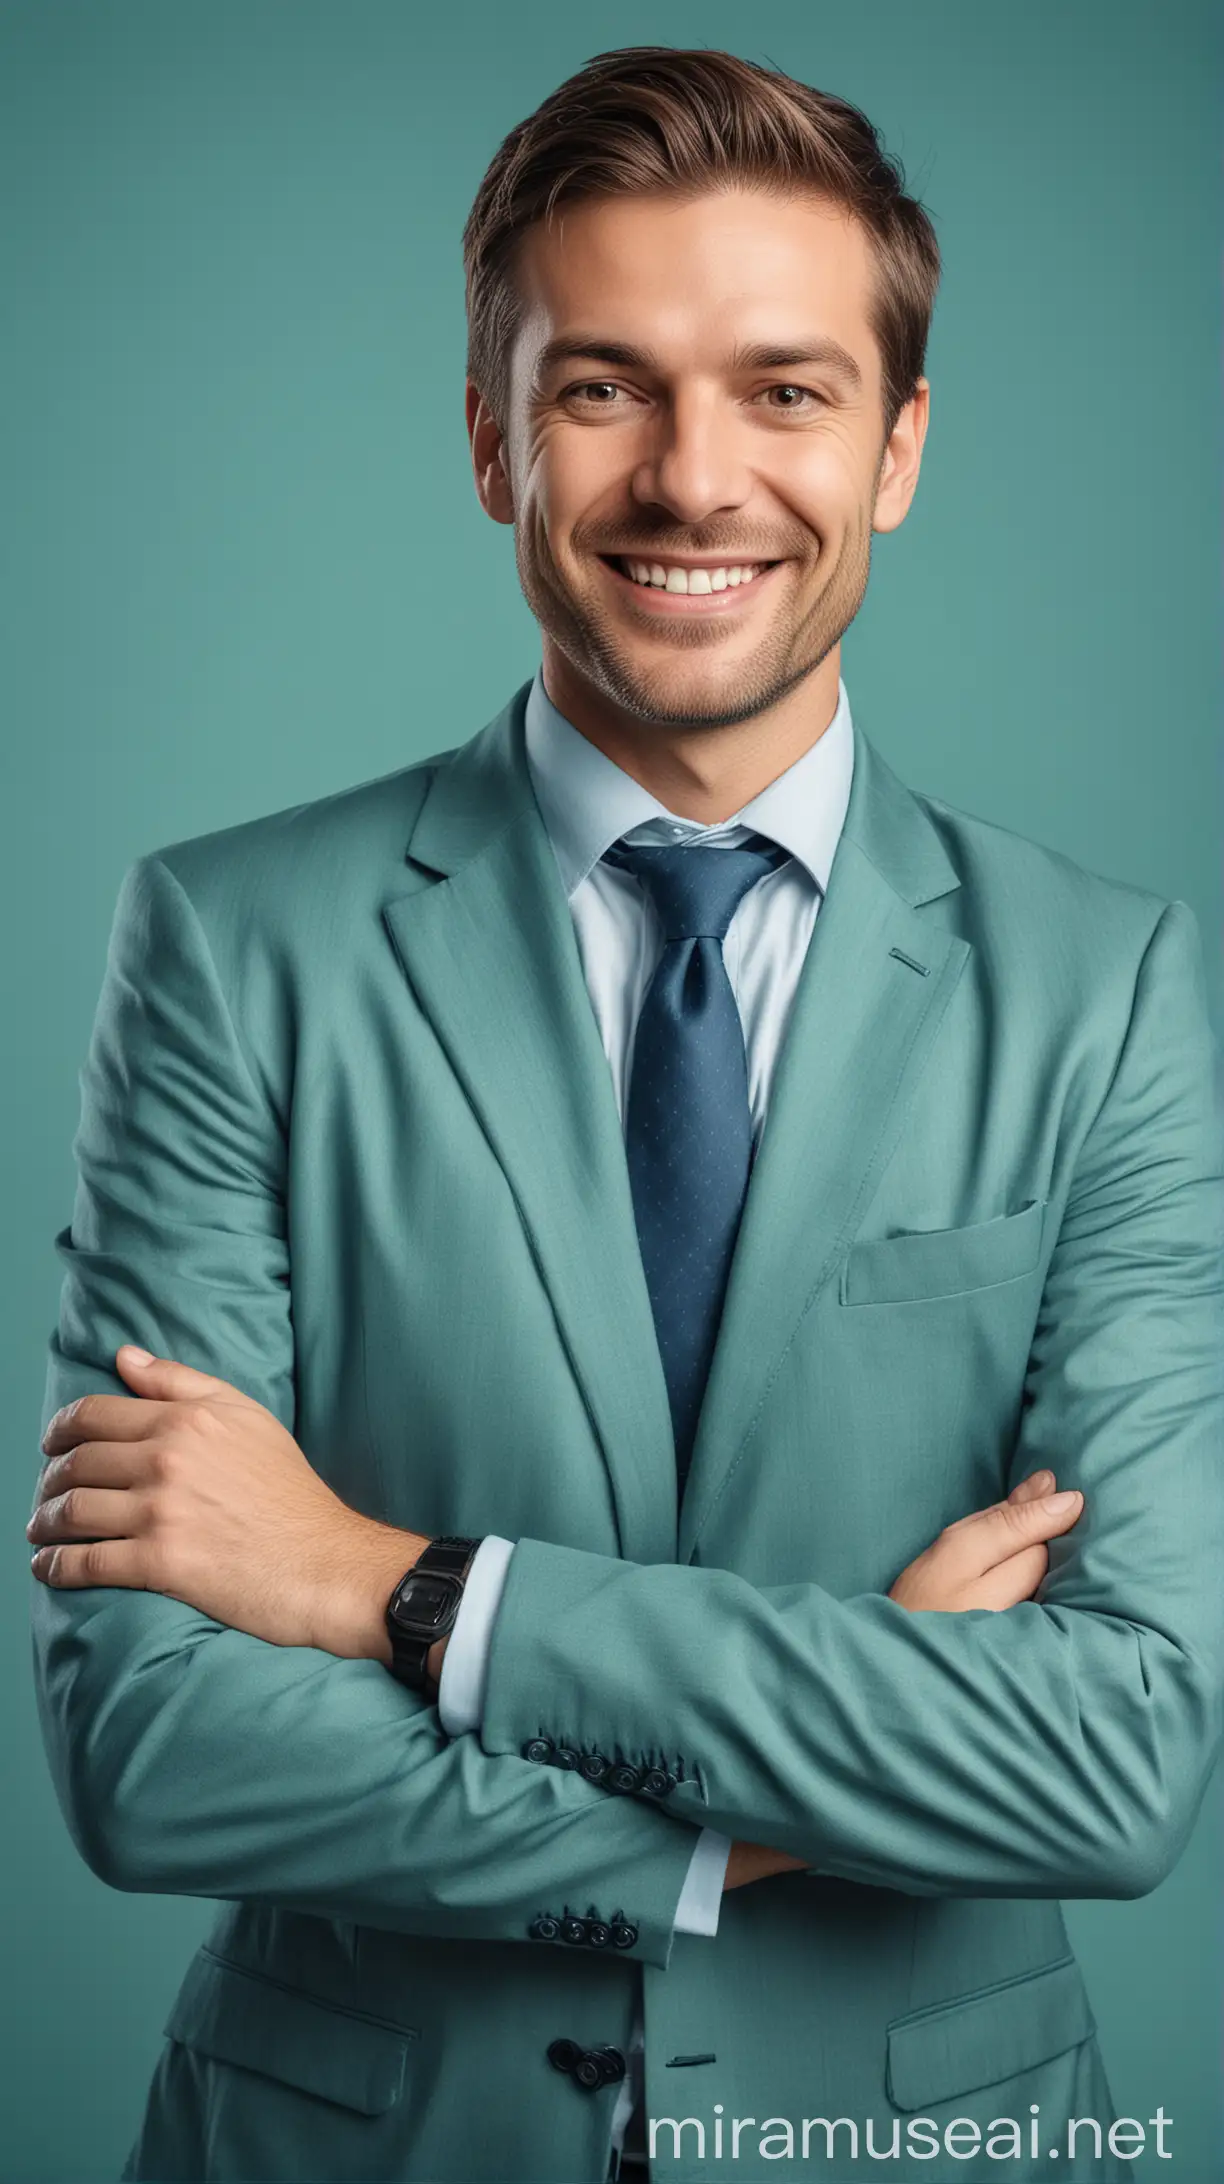 A realistic image of a Commercial Real Estate Investor with a happy expression and his arms crossed, looking directly at the camera with an inviting expression. Image background is greenish blue